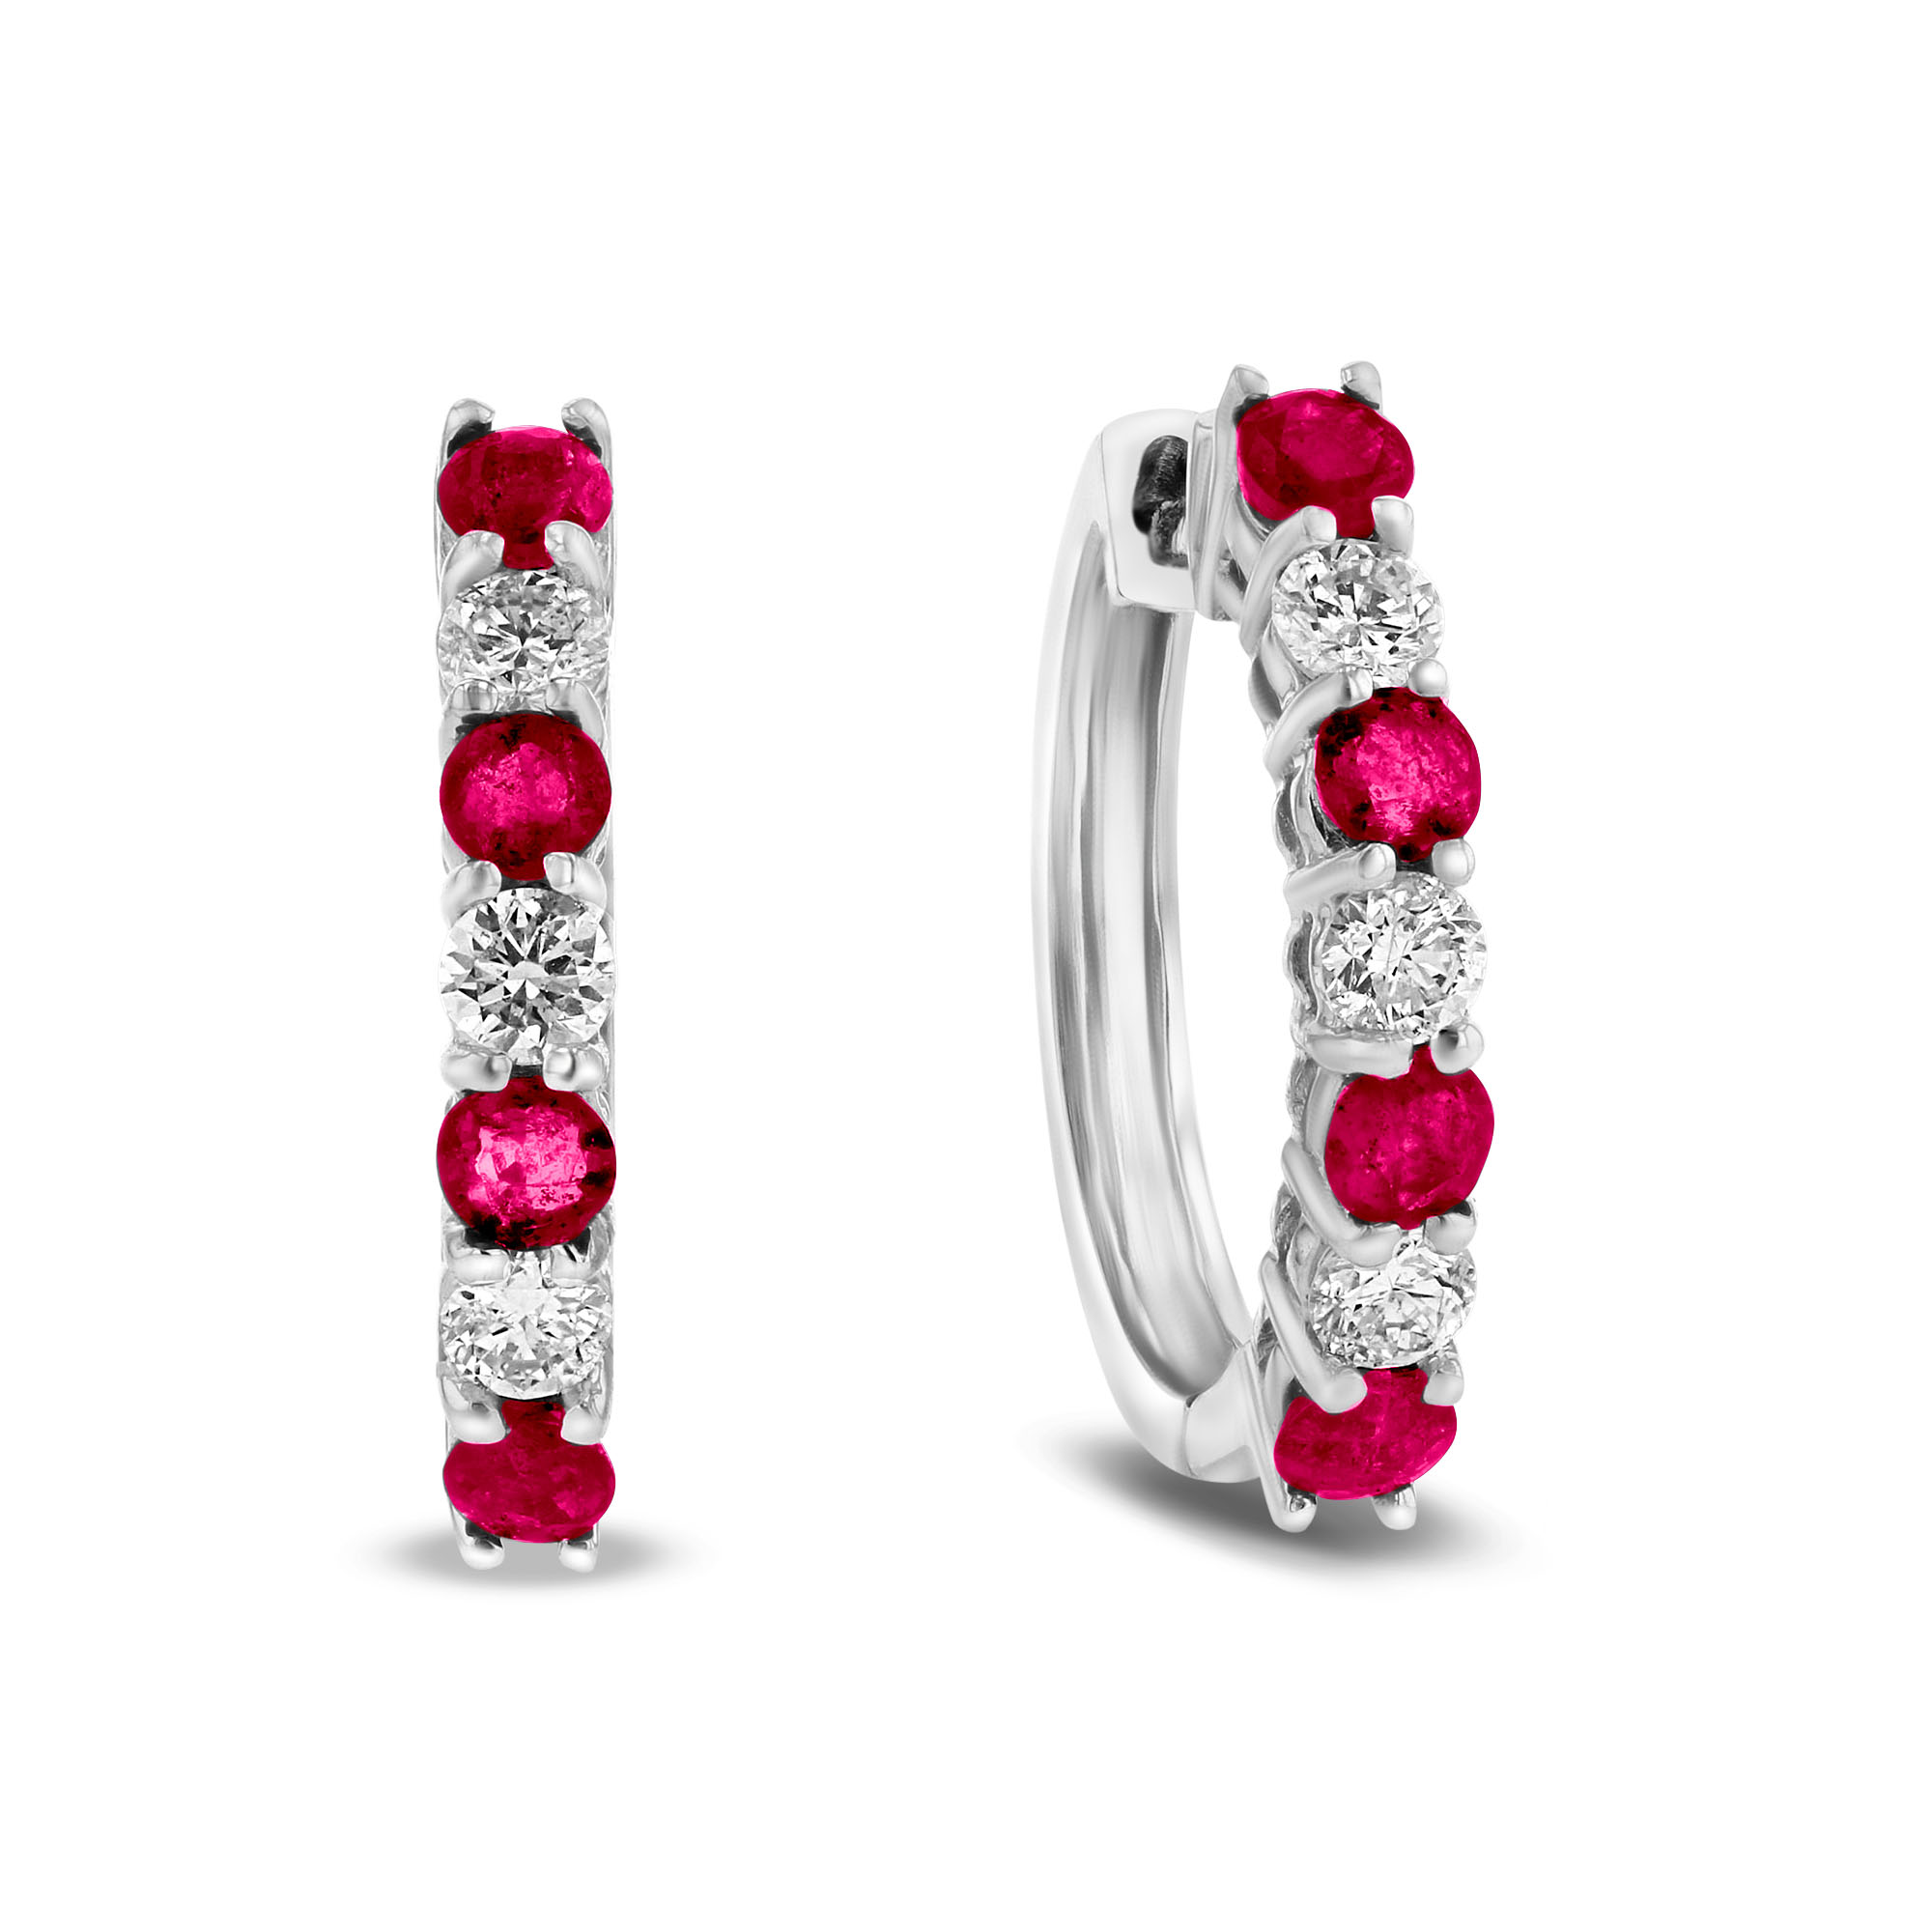 View 1.15ctw Diamond and Ruby Hoop Earrings in 14k White Gold